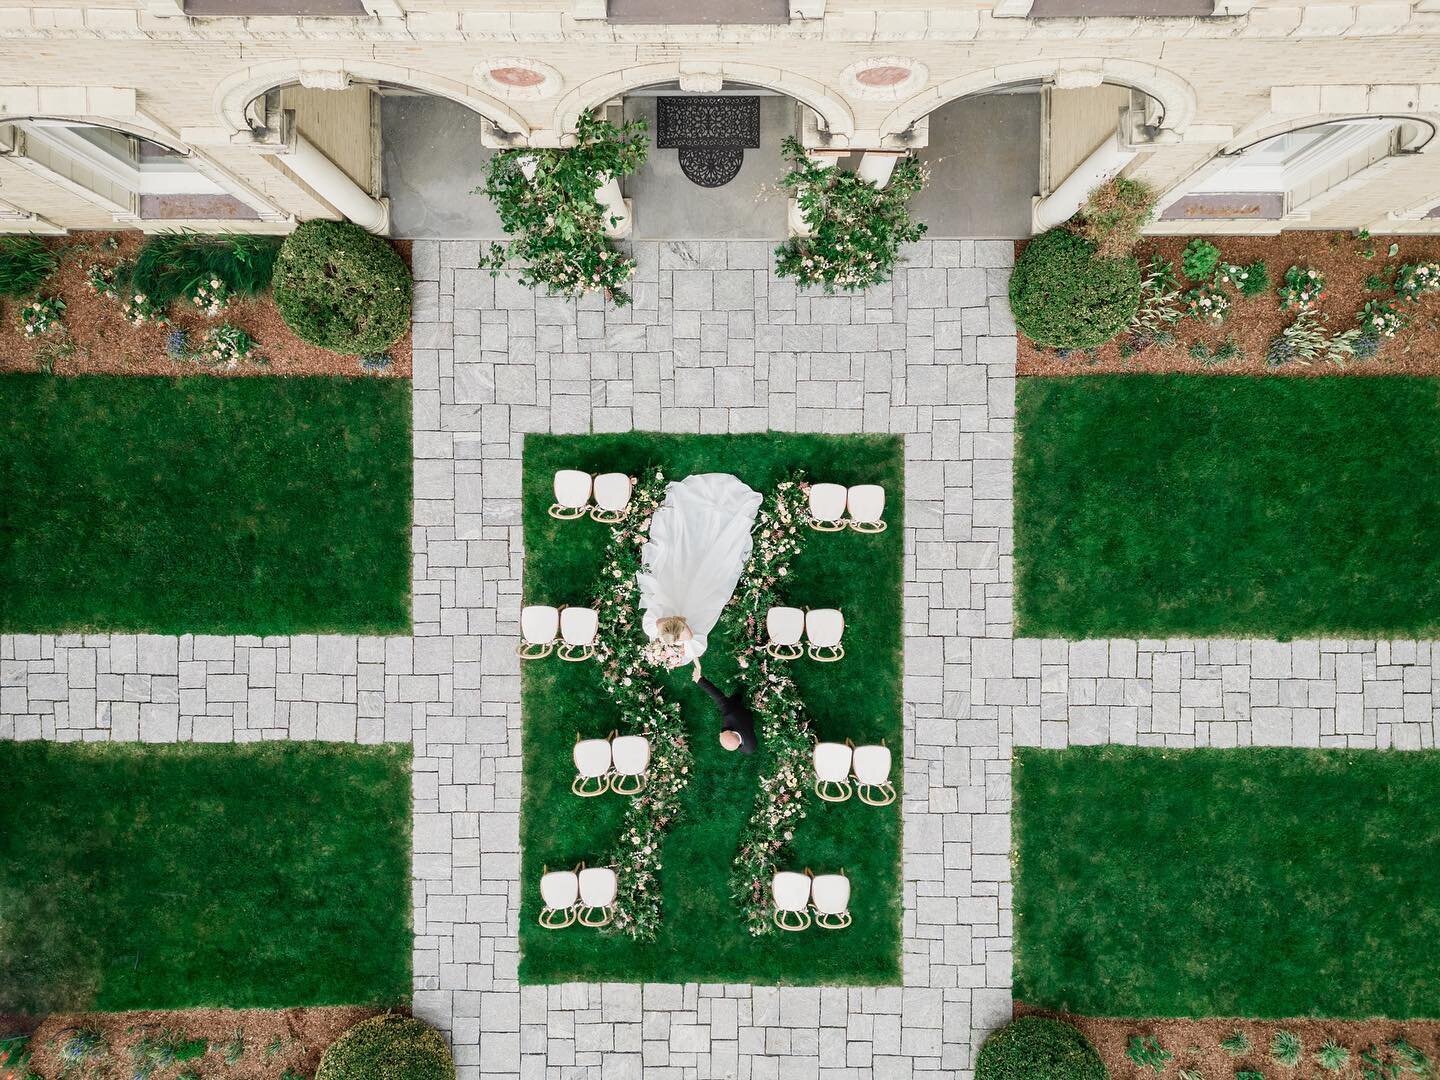 In love with this view that I composed with the help of the drone operator. It has inspired me to go through the steps to be able to bring our drone on wedding days. What do you think? Worth the effort? 

Planning + Design @jessicahennesseyweddings 
